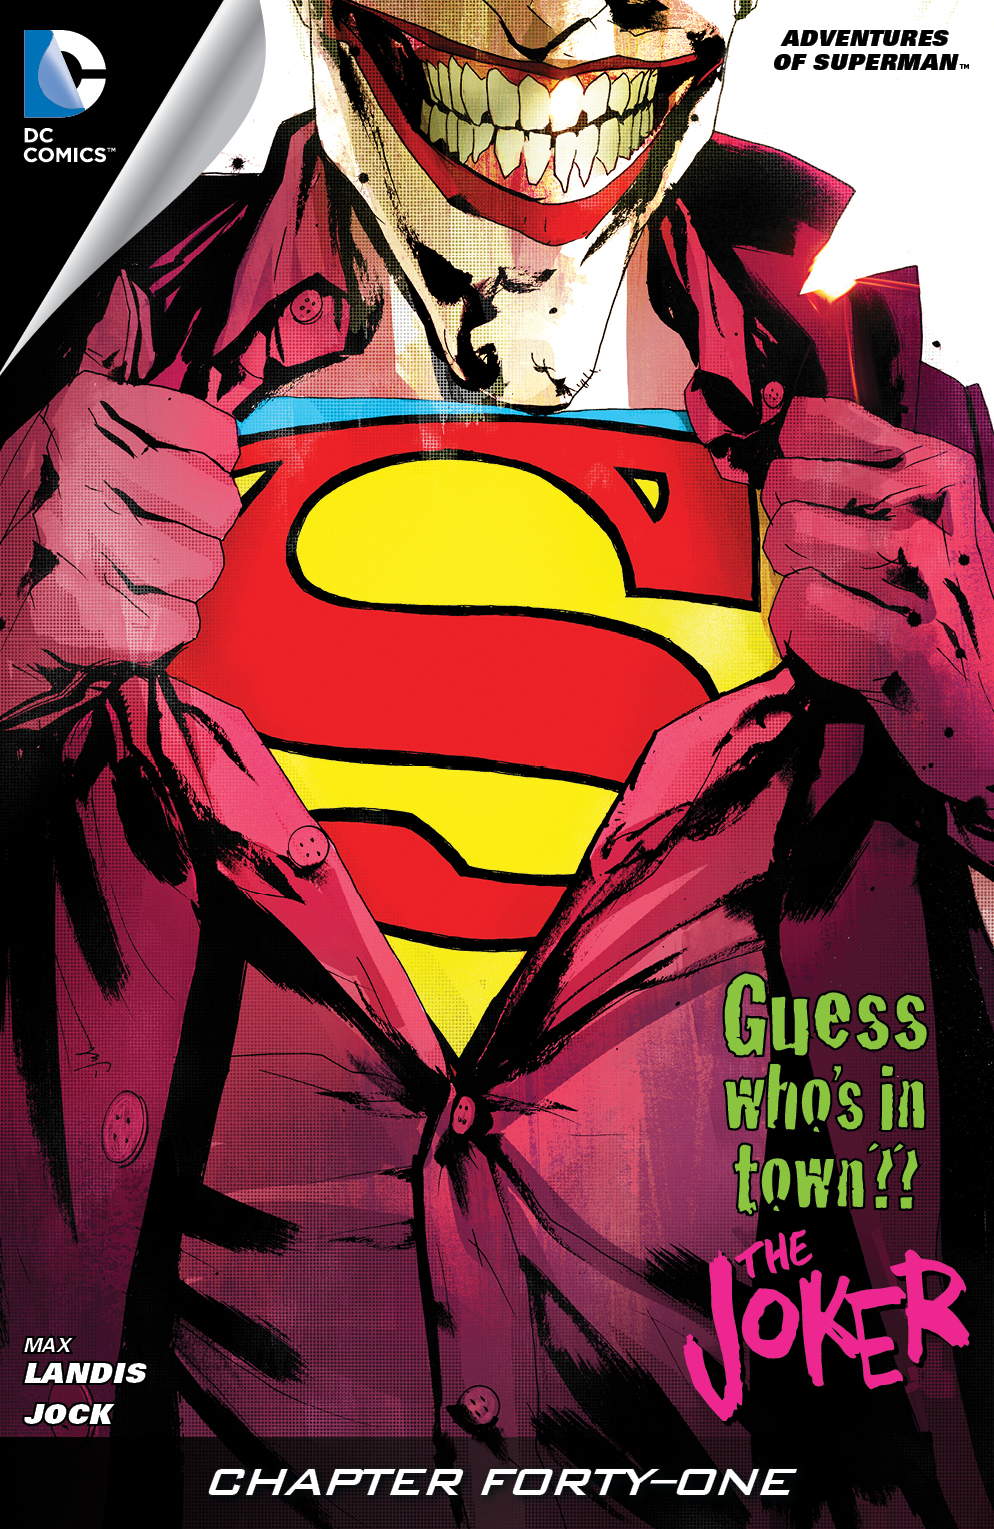 Adventures of Superman (2013-) #41 preview images